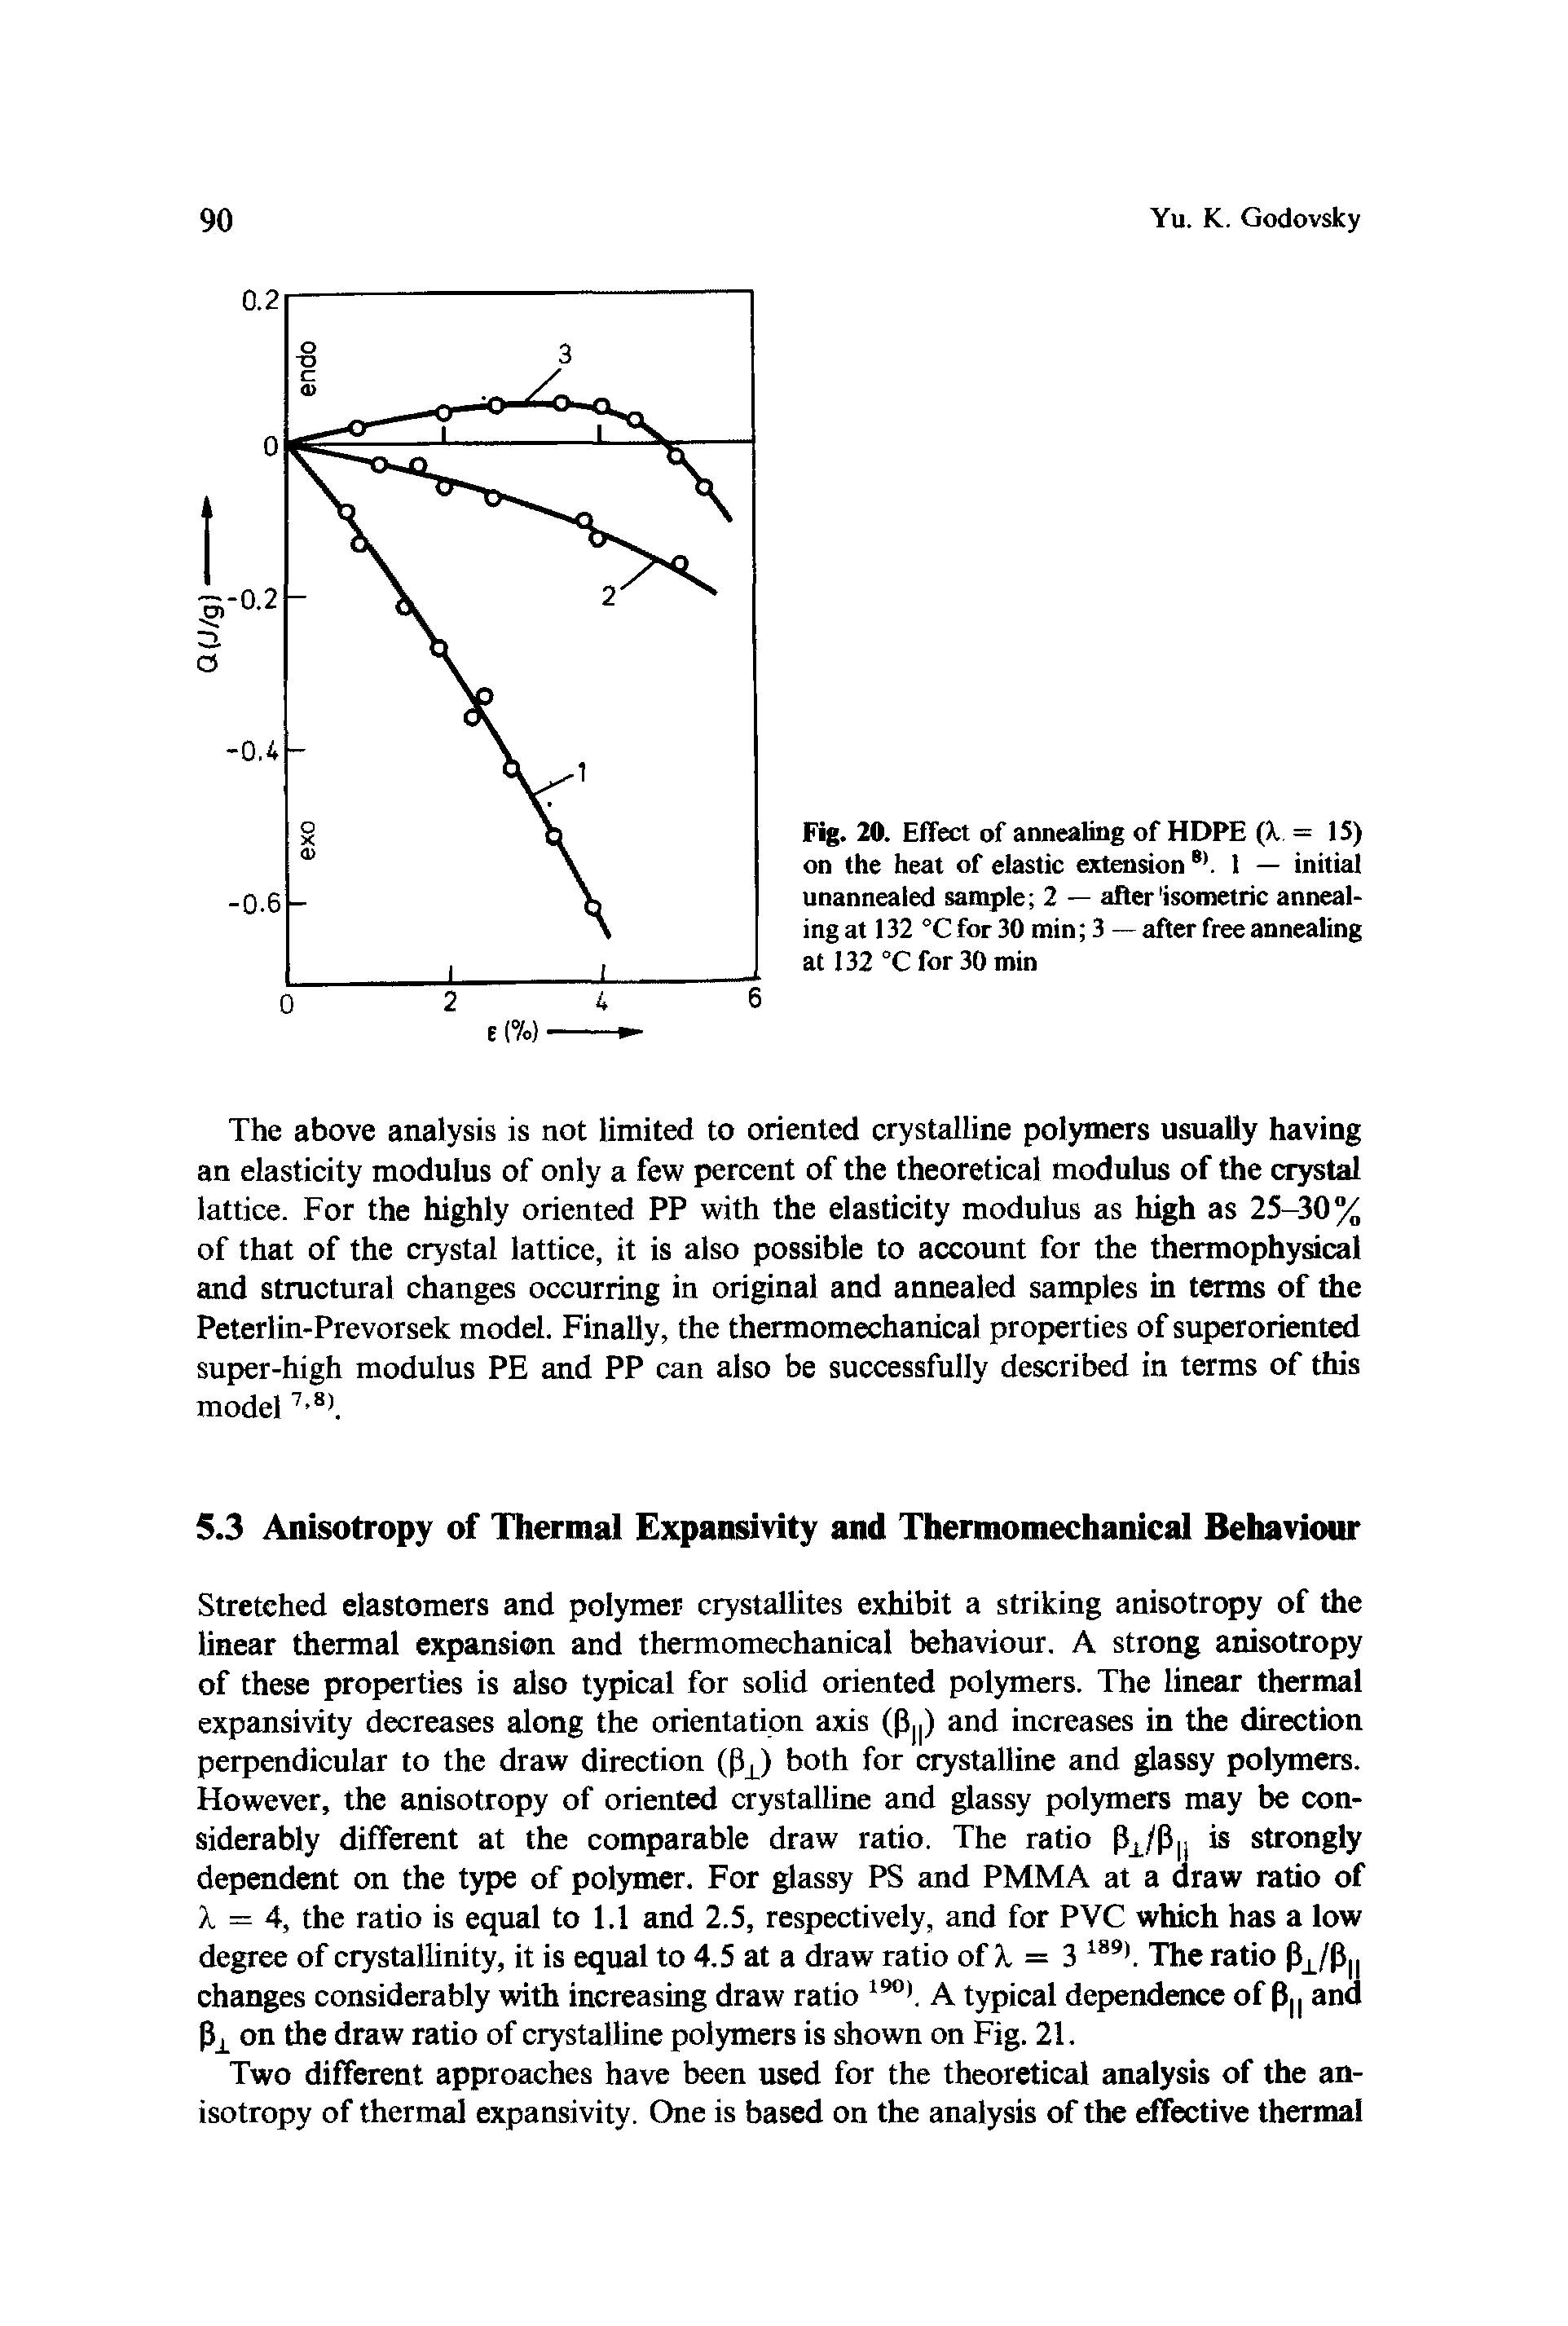 Fig. 20. Effect of annealing of HDPE (X = 15) on the heat of elastic extension 8). 1 — initial unannealed sample 2 — after isometric annealing at 1 32 °C for 30 min 3 — after free annealing at 132 °C for 30 min...